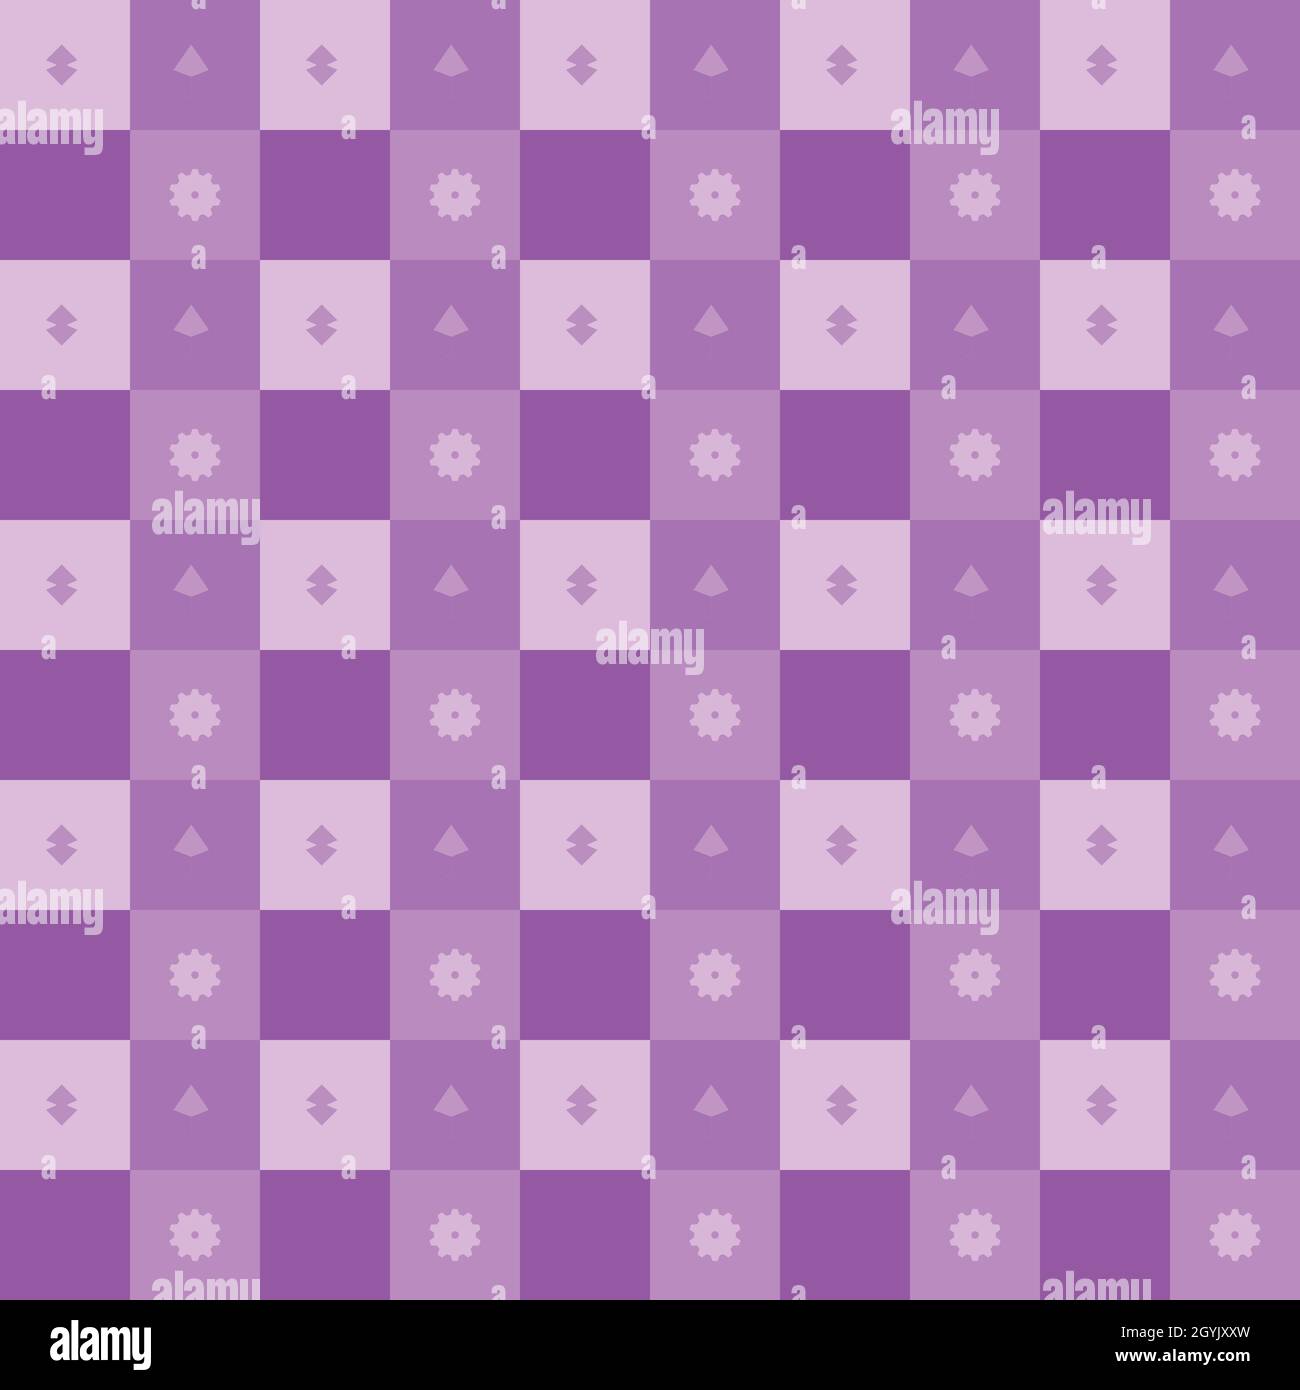 Plaid fabric violet color tartan textile gingham kids checkerboard abstract background wallpaper template pattern seamless vector illustration EPS Stock Vector